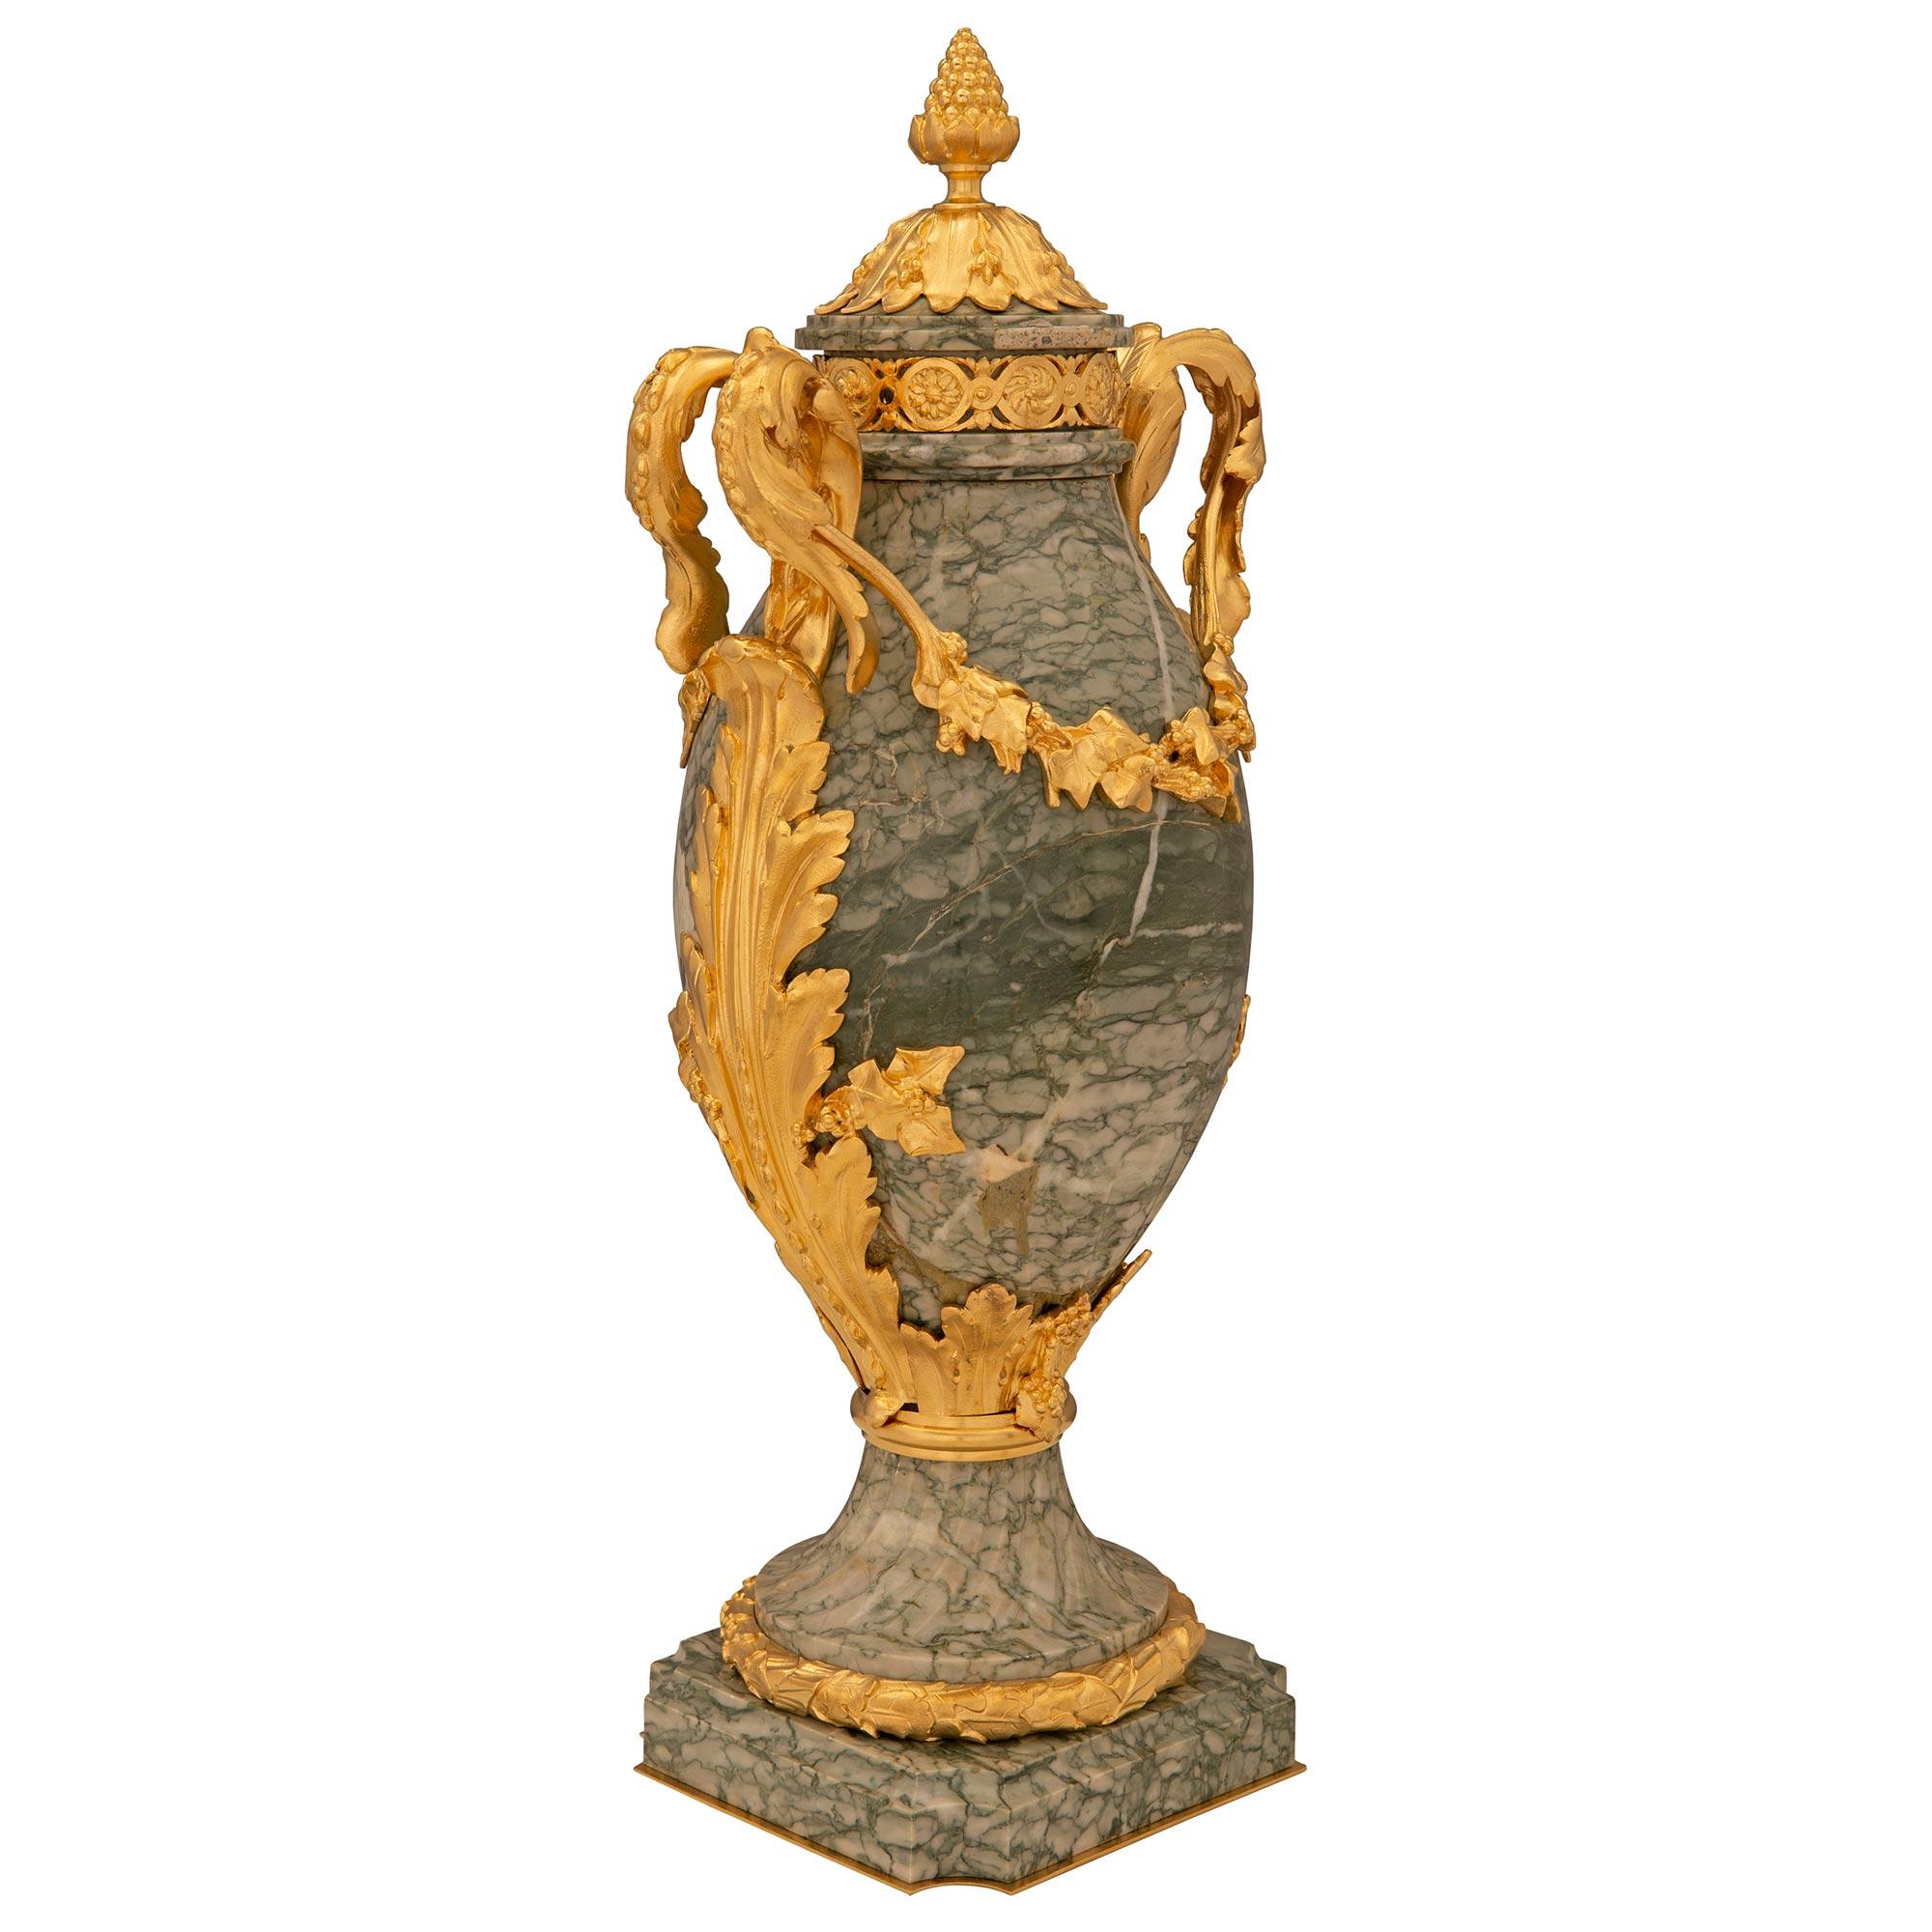 A stunning true pair of French 19th century Louis XVI st. Vert Campan marble and ormolu urns. Each urn is raised by an elegant square base with concave corners, a fine mottled border, and a delicate bottom ormolu fillet. The socle shaped pedestal